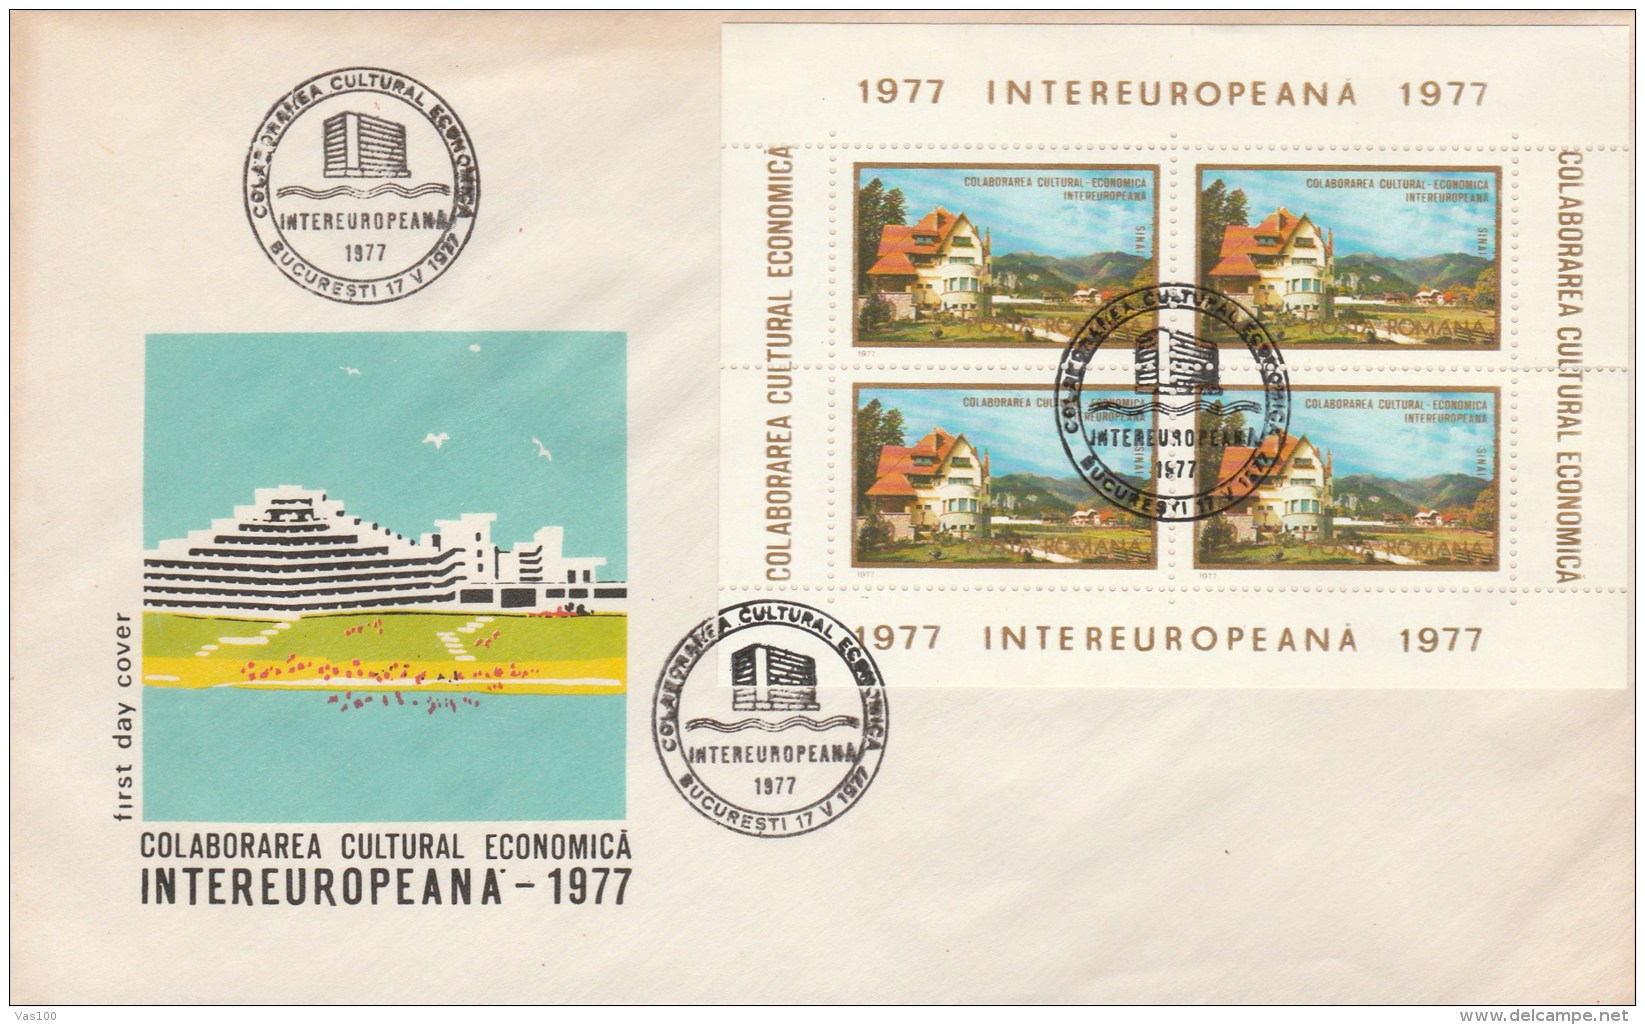 #T232 SEASIDE, BUILDING, CULTURAL-ECONOMICAL COLLABORATION, SIANIA, TURISM,, COVERS FDC X 2,  1977, ROMANIA. - FDC